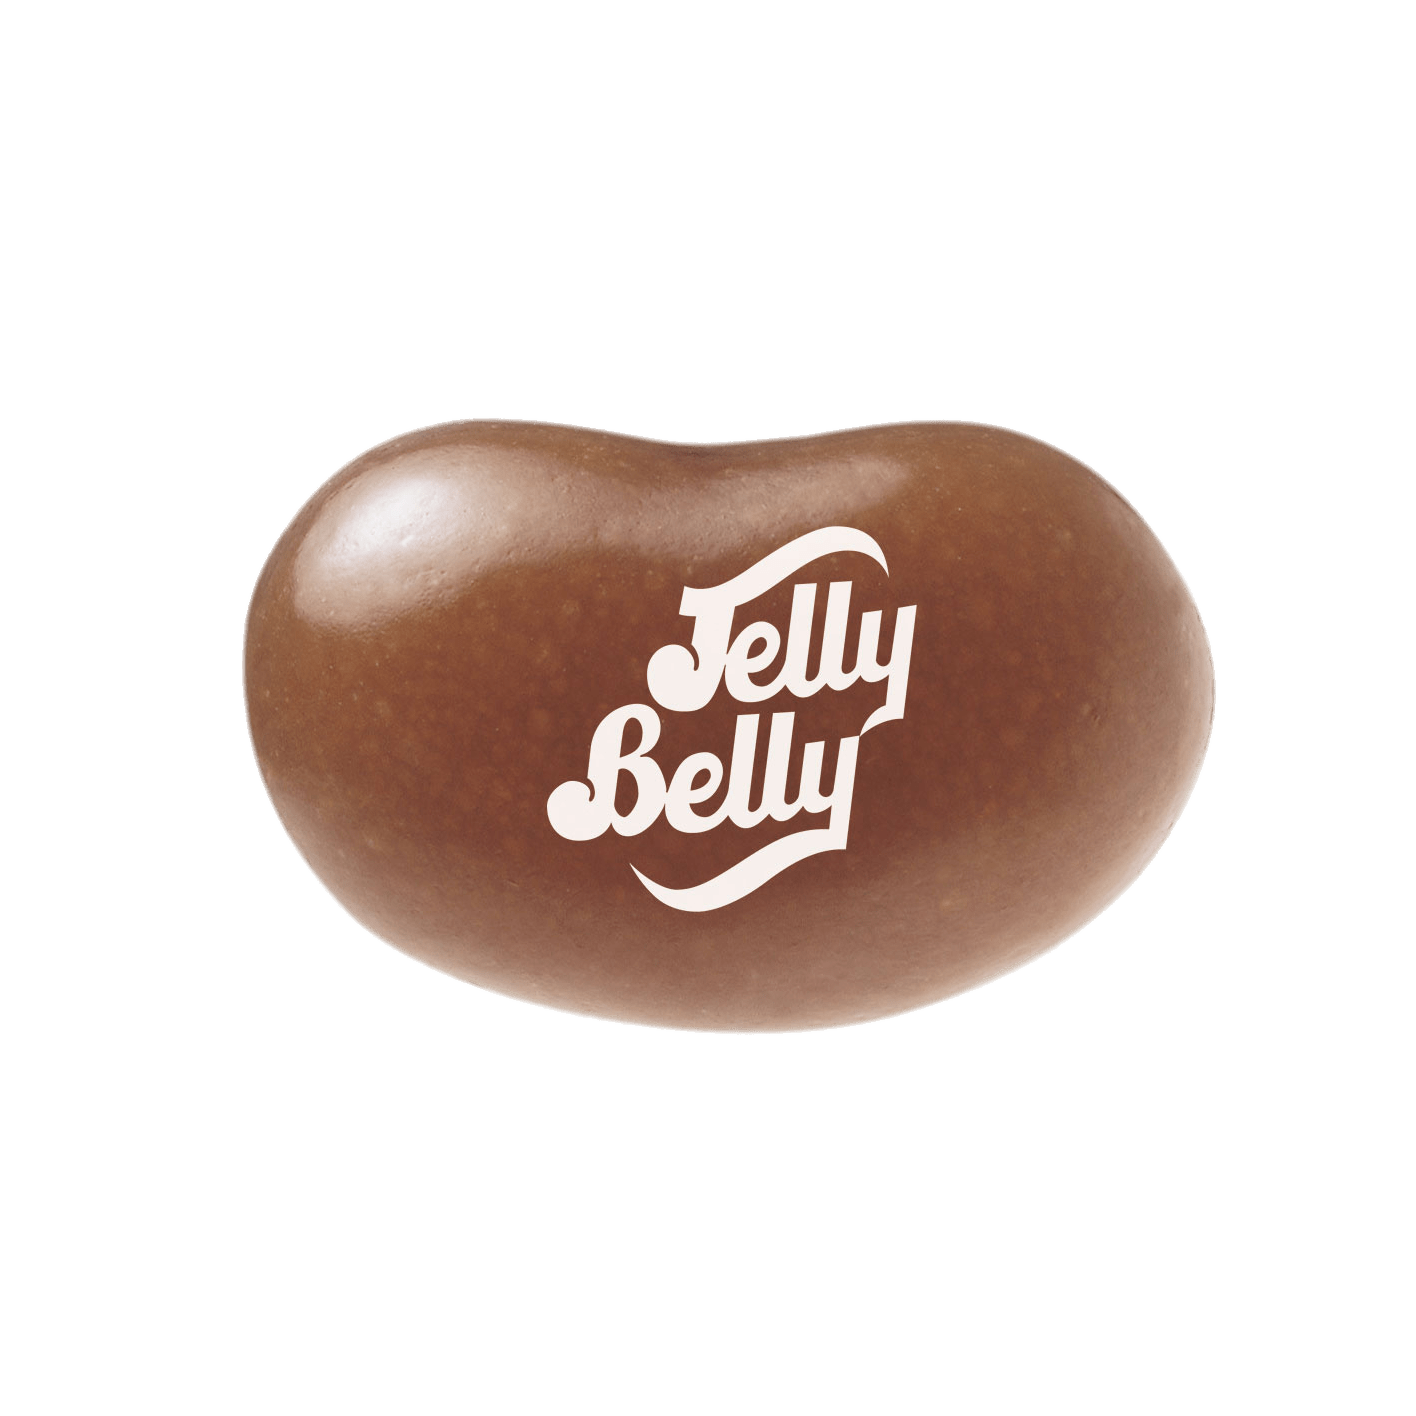 Jelly Belly PNG Image in Transparent pngteam.com